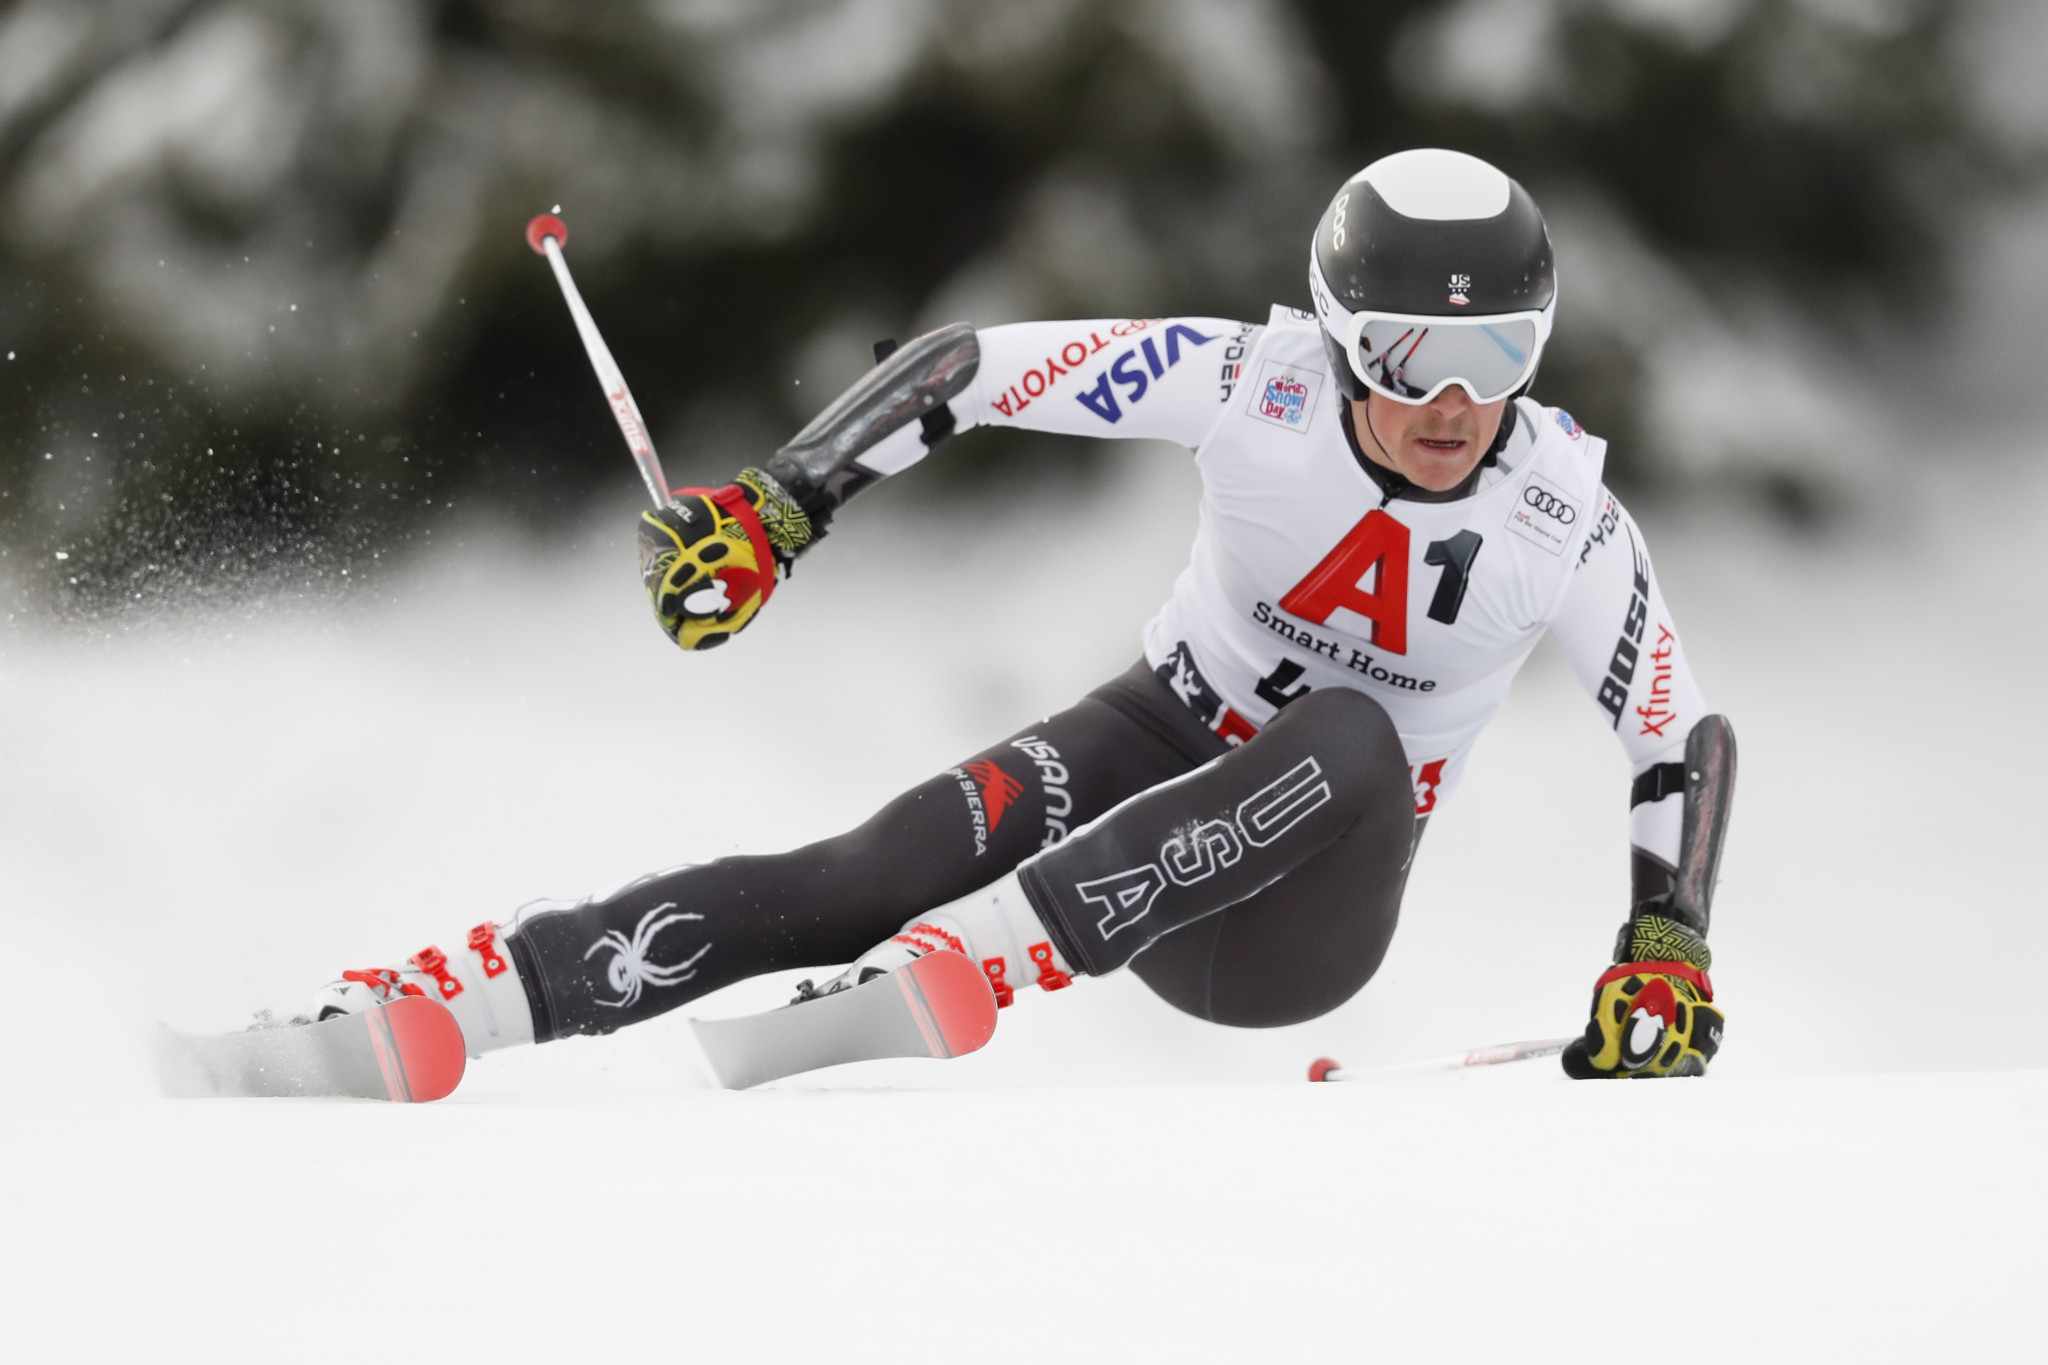 River Radamus won his first gold medal at the FIS World Junior Alpine Skiing Championships in Val di Fassa with victory in the men's super-G having previously finished second twice ©Getty Images